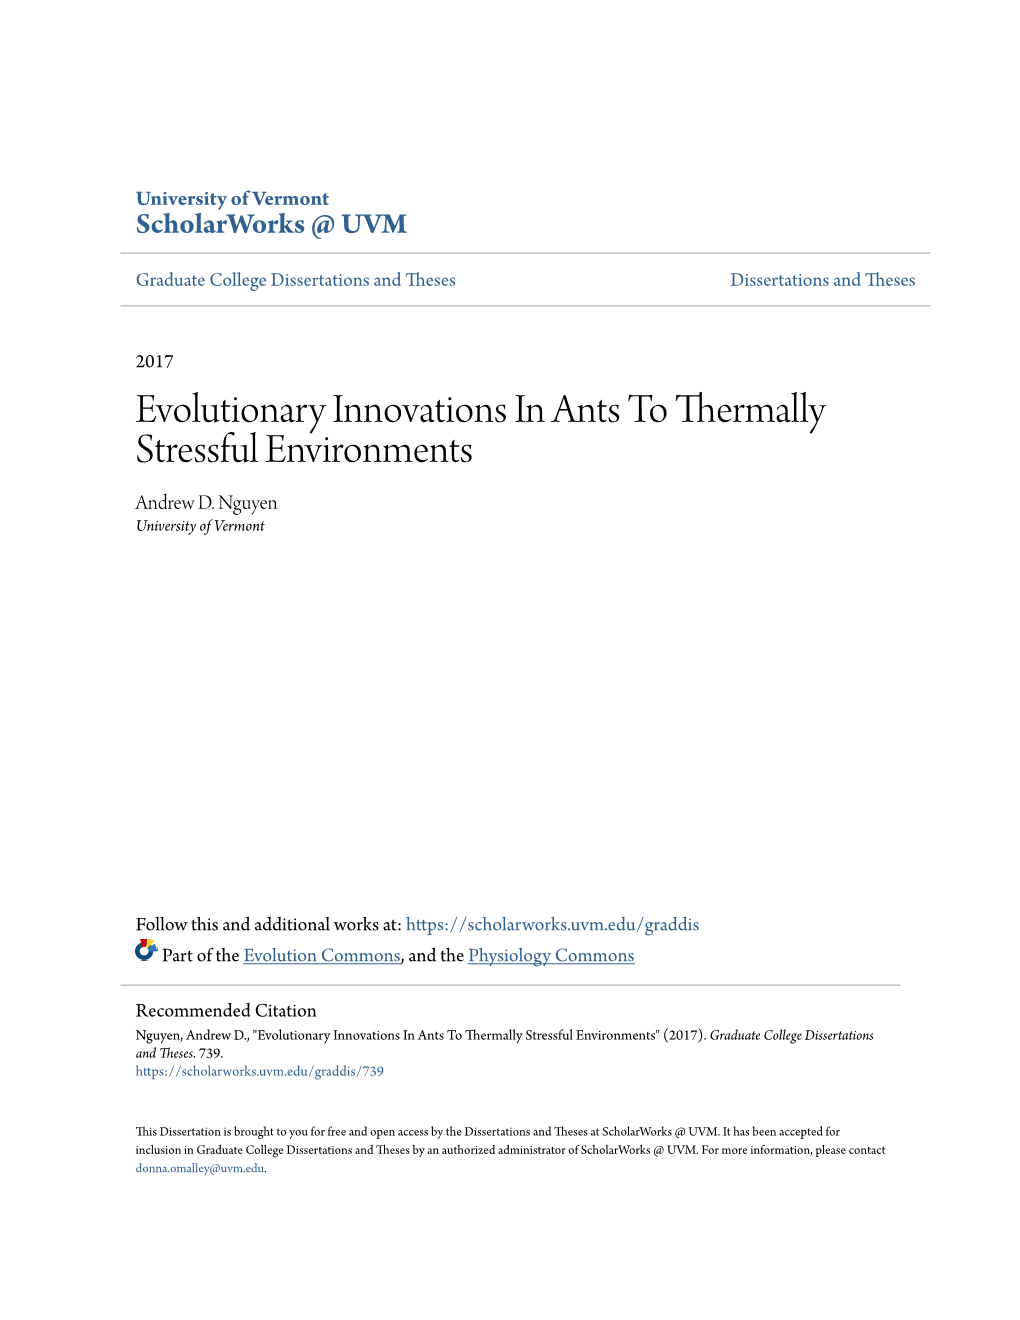 Evolutionary Innovations in Ants to Thermally Stressful Environments Andrew D